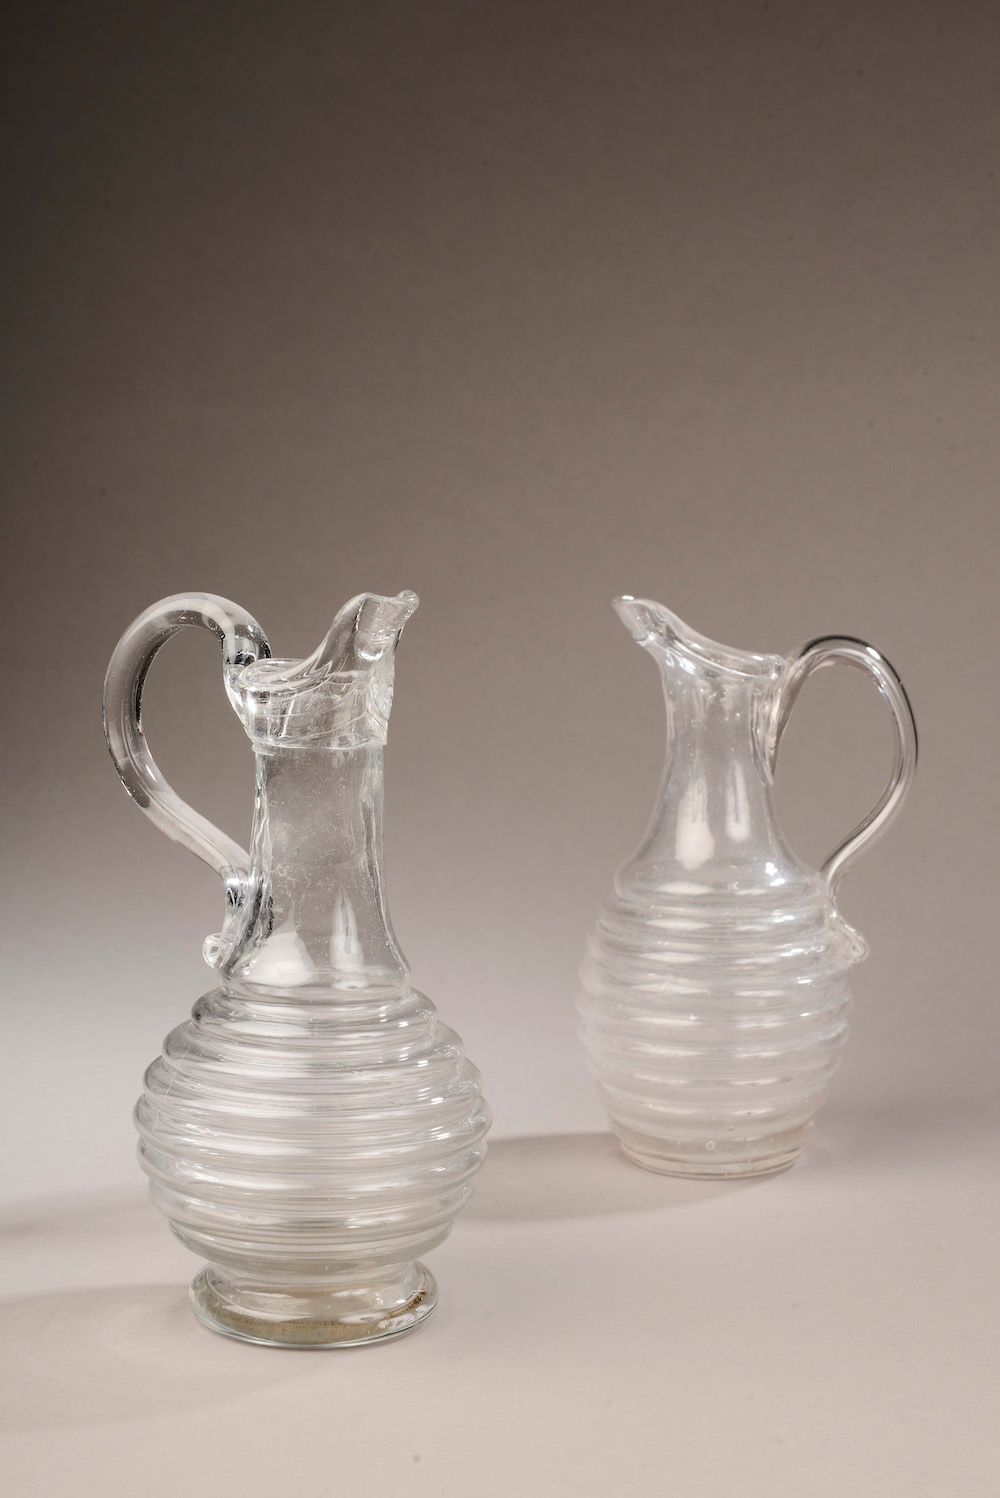 Null Two blown glass pitchers, the handle applied by heat, the body ringed.

Nor&hellip;